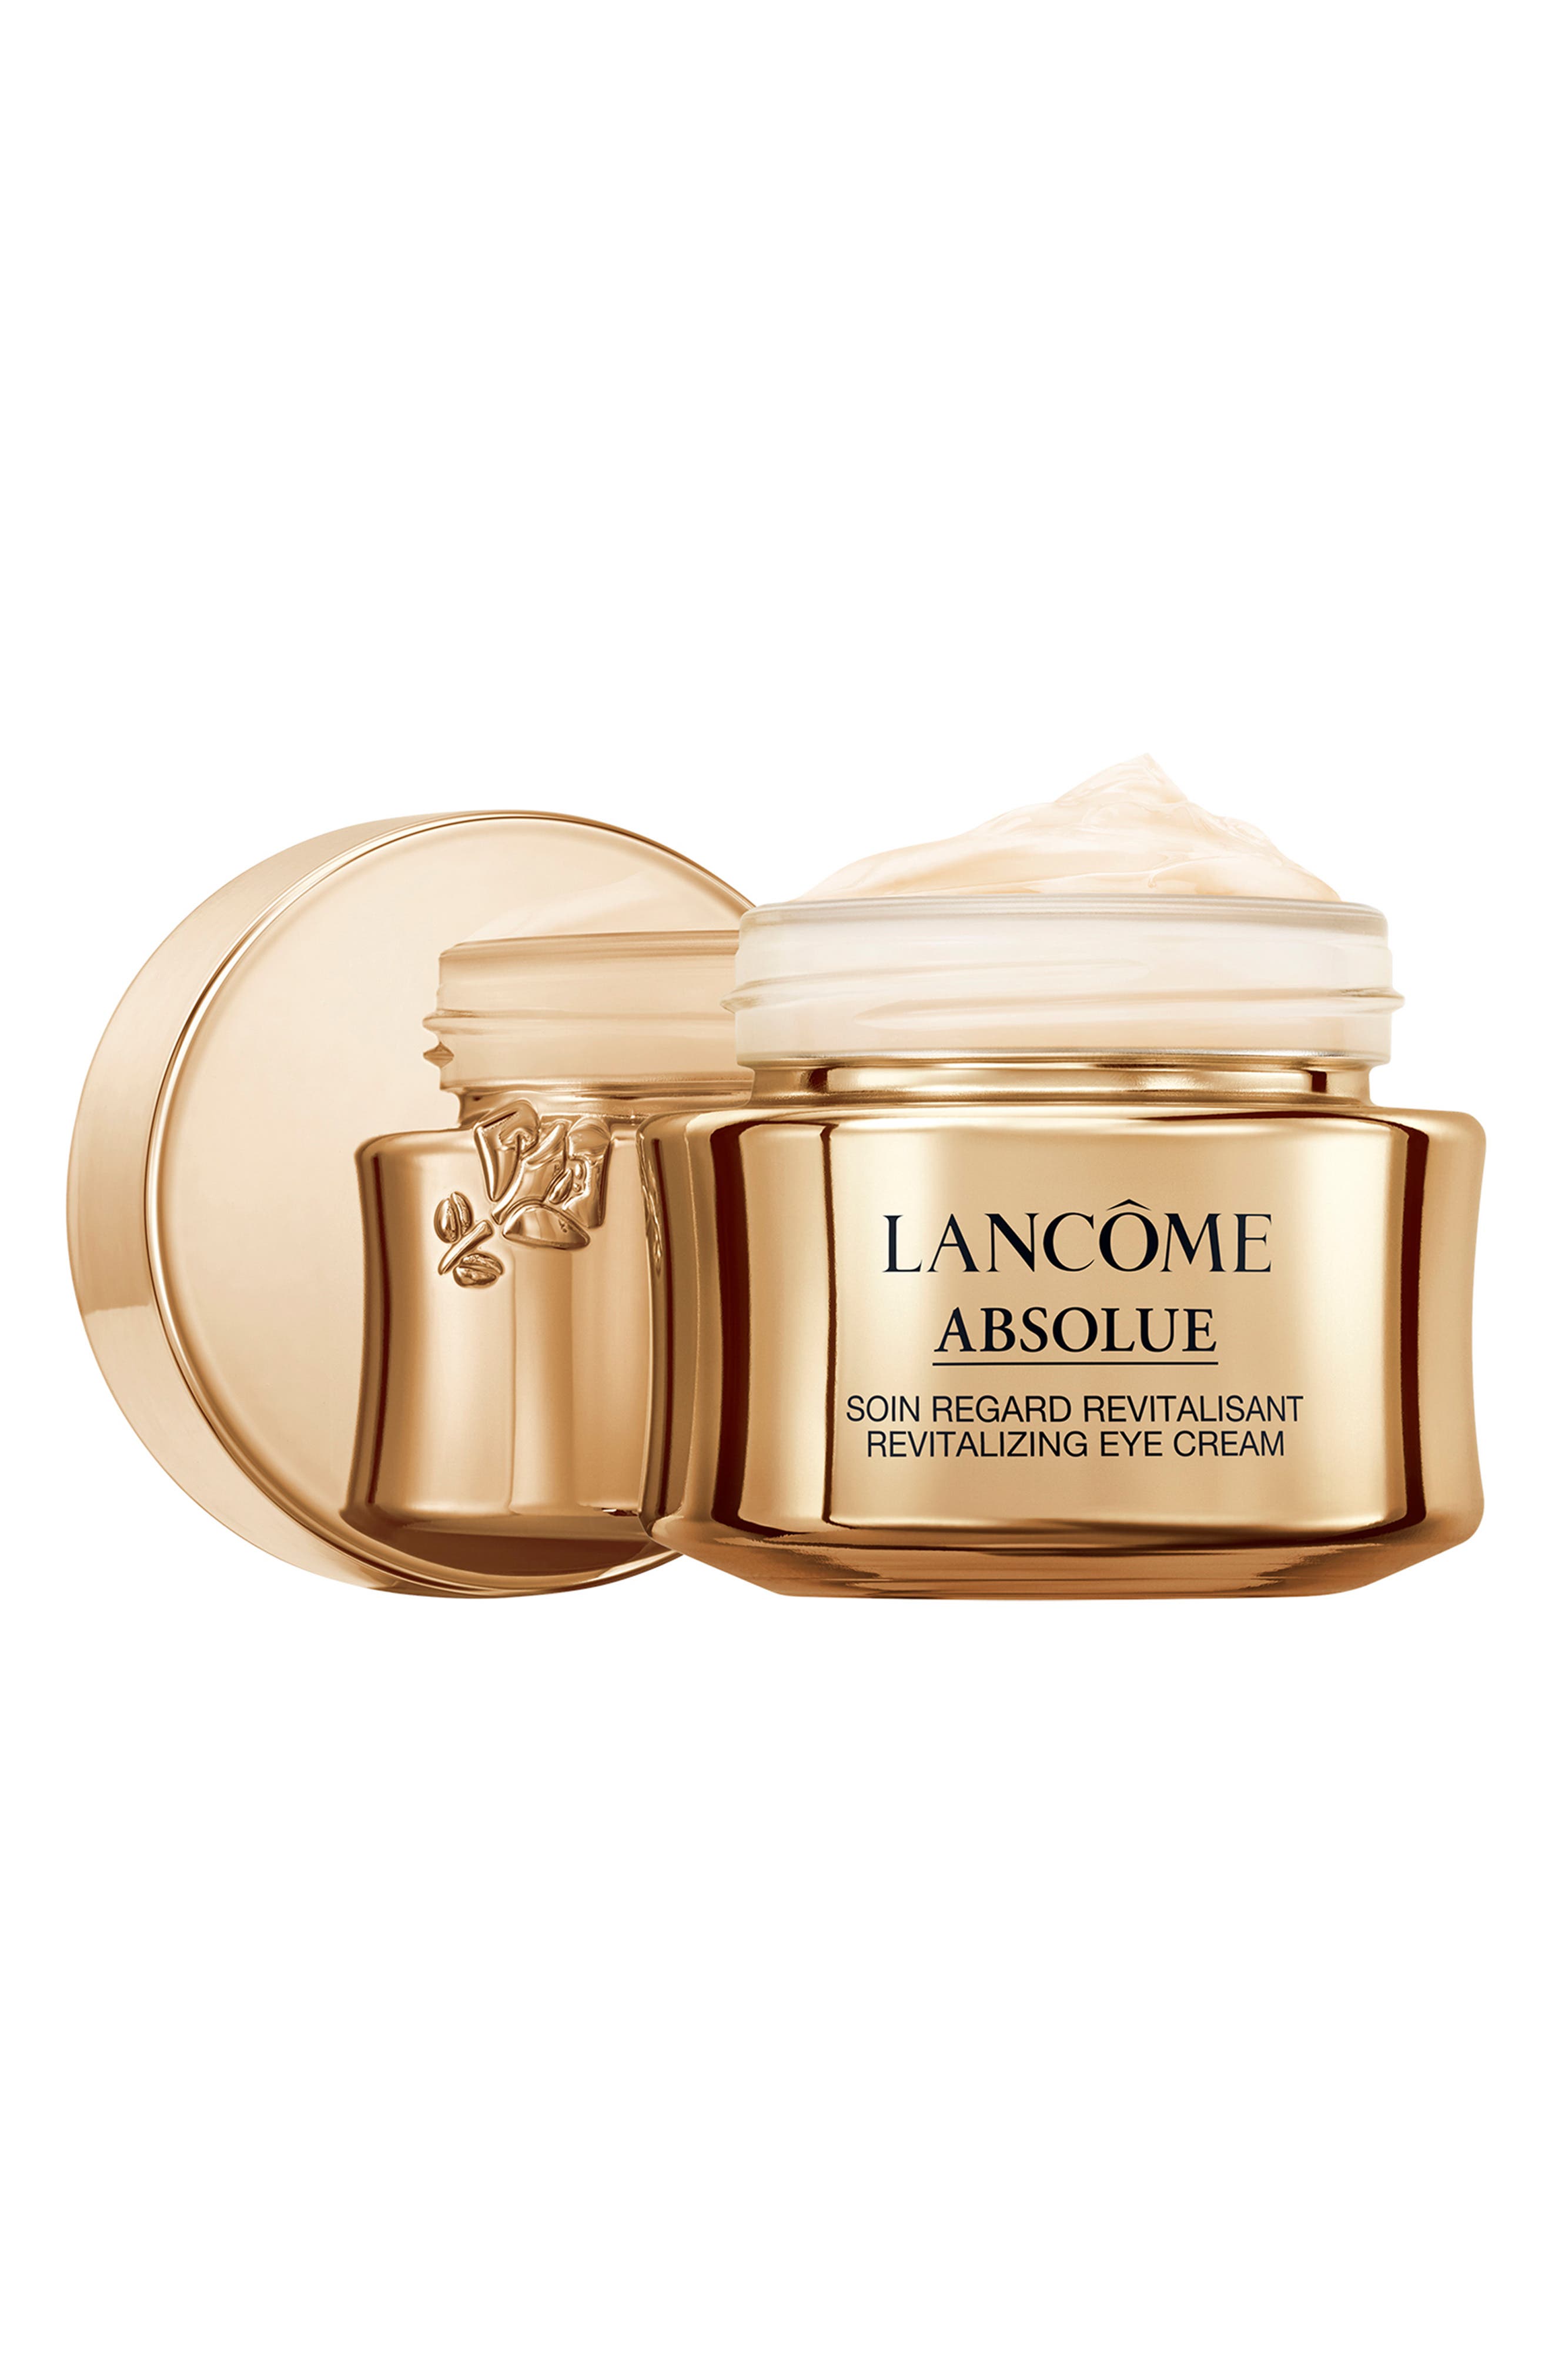 Lancome Absolue Revitalizing Anti-Aging Eye Cream at Nordstrom